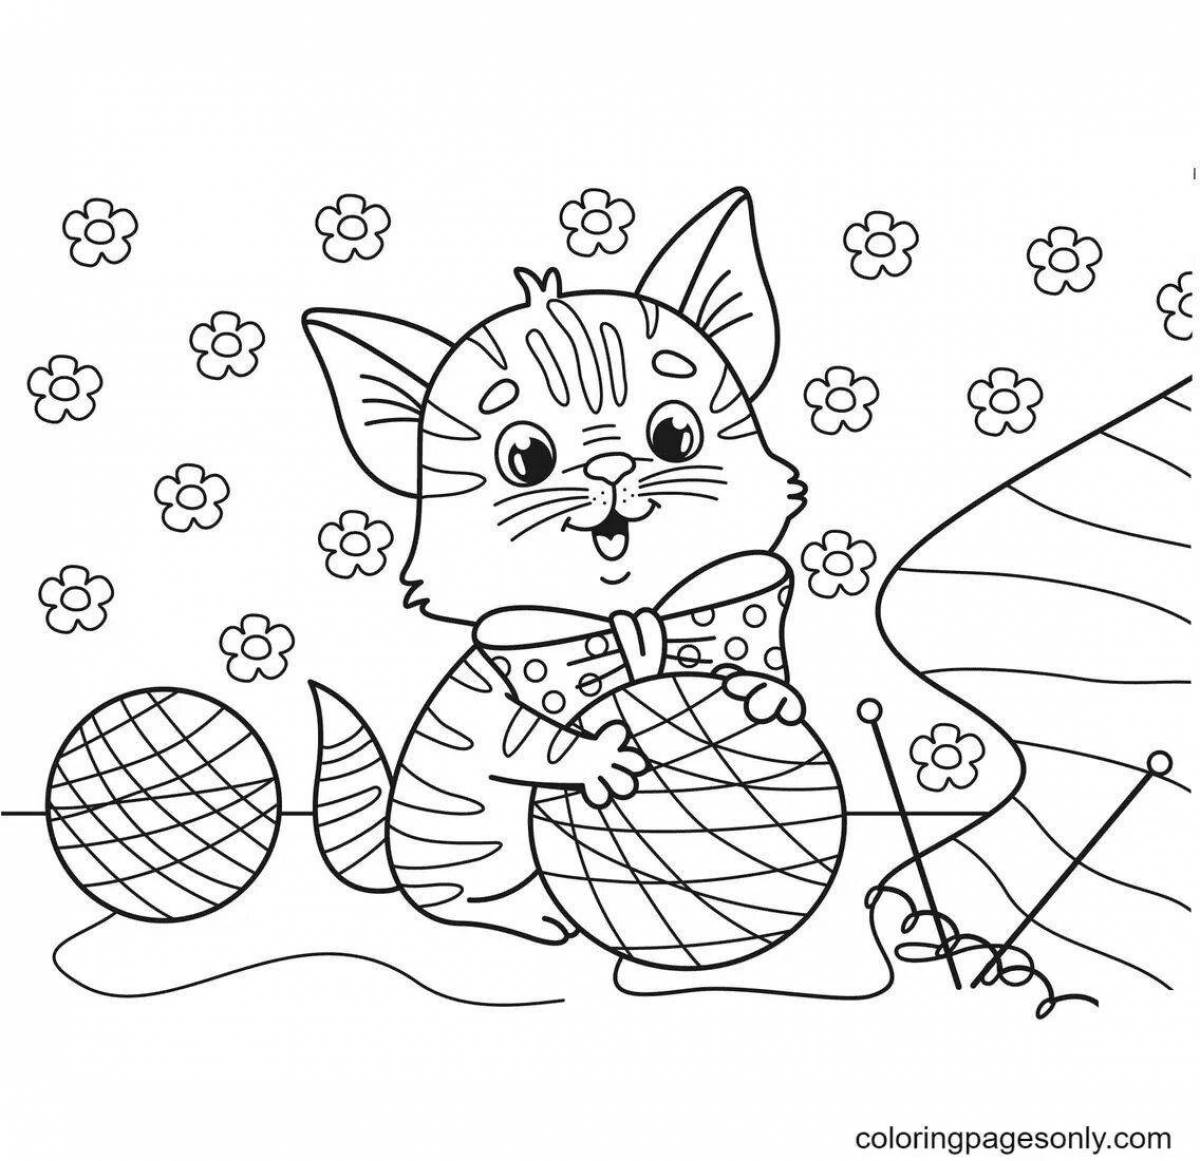 Playful kitty coloring by numbers